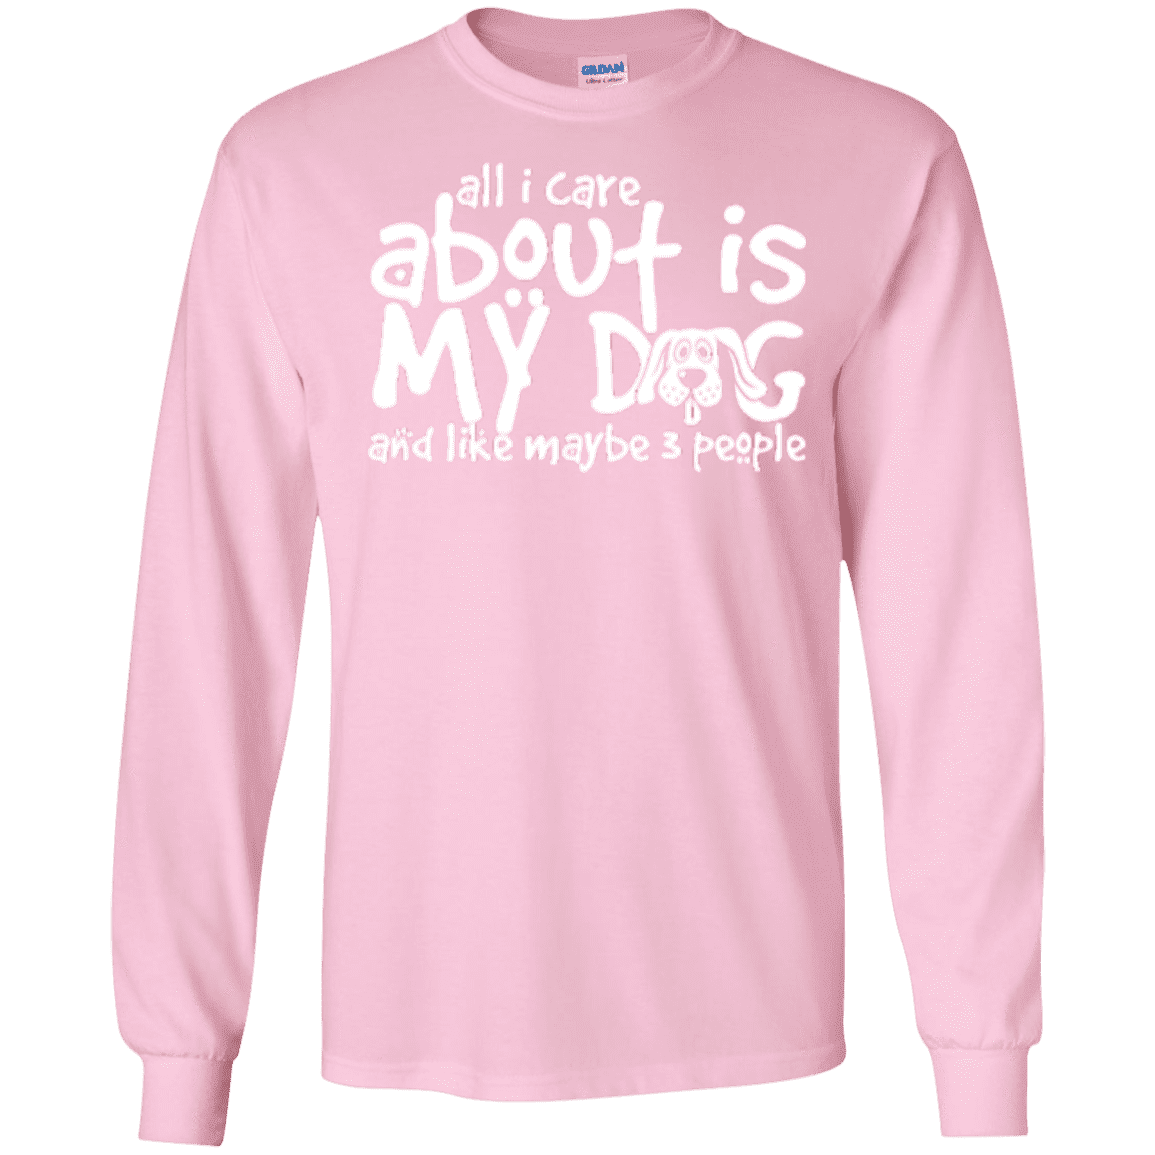 All I Care About Is My Dog - Long Sleeve T Shirt.